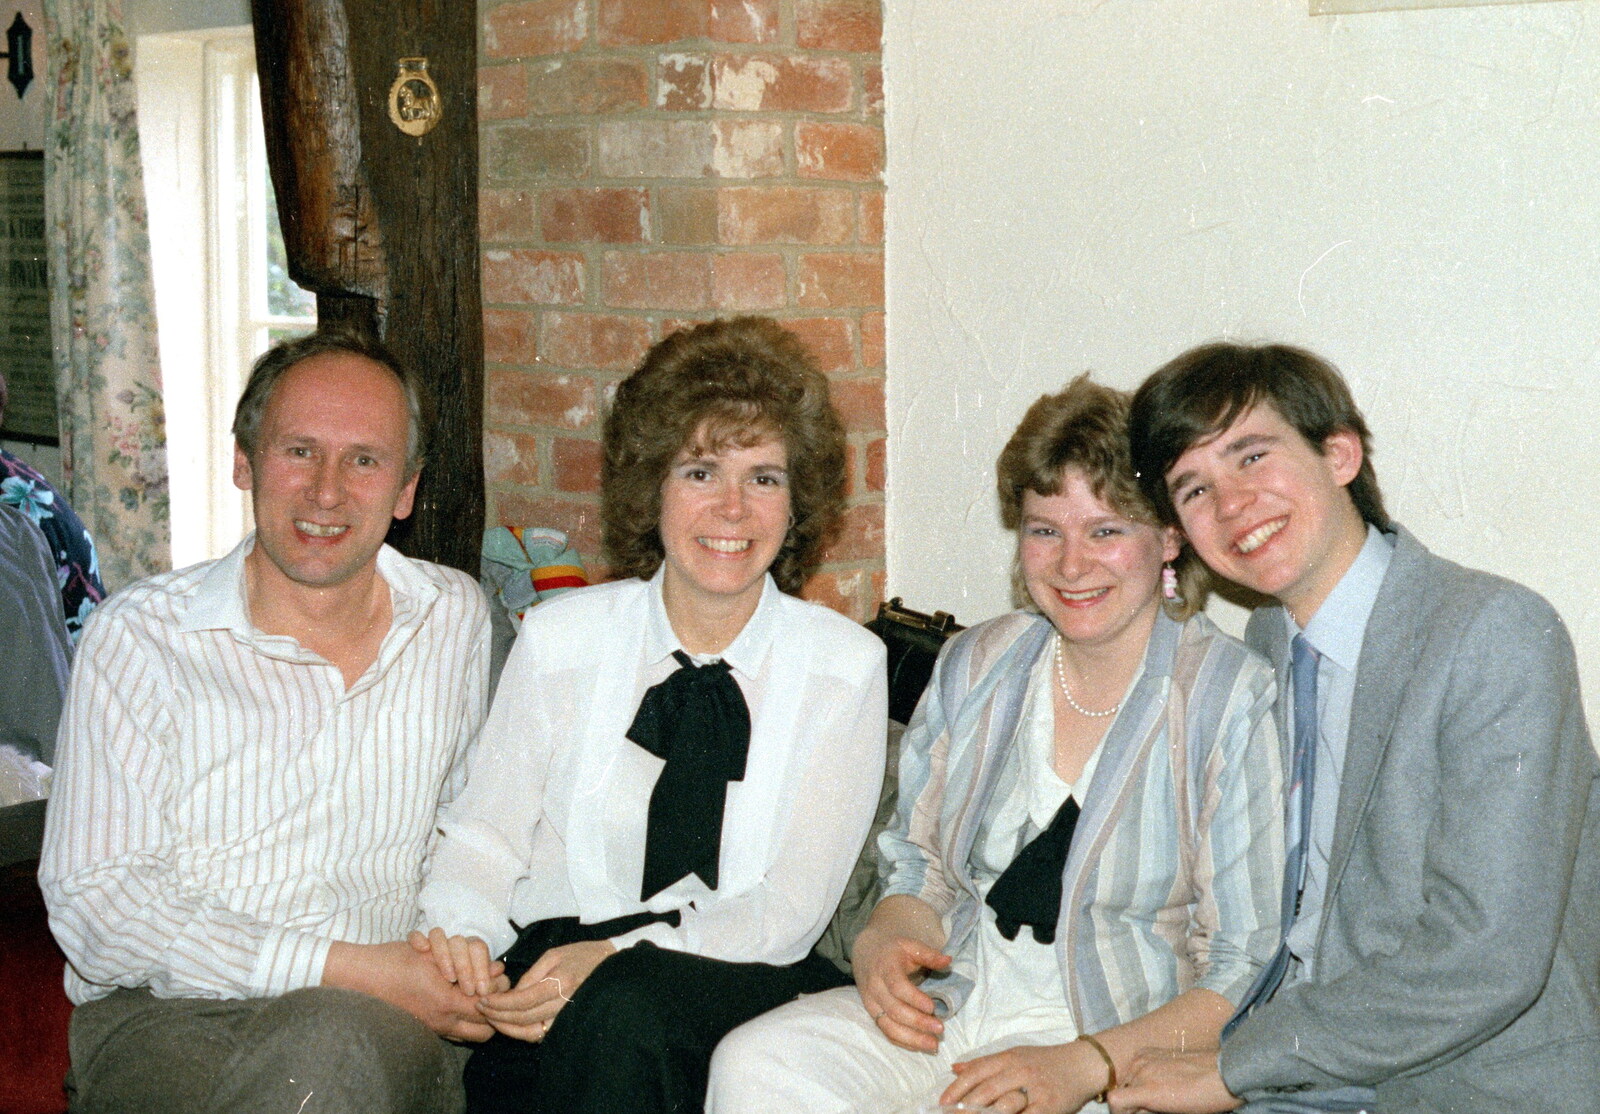 Phil's parents in the pub in Marchwood from The Last Day of Term, and Leaving New Milton, Hampshire - 18th September 1985